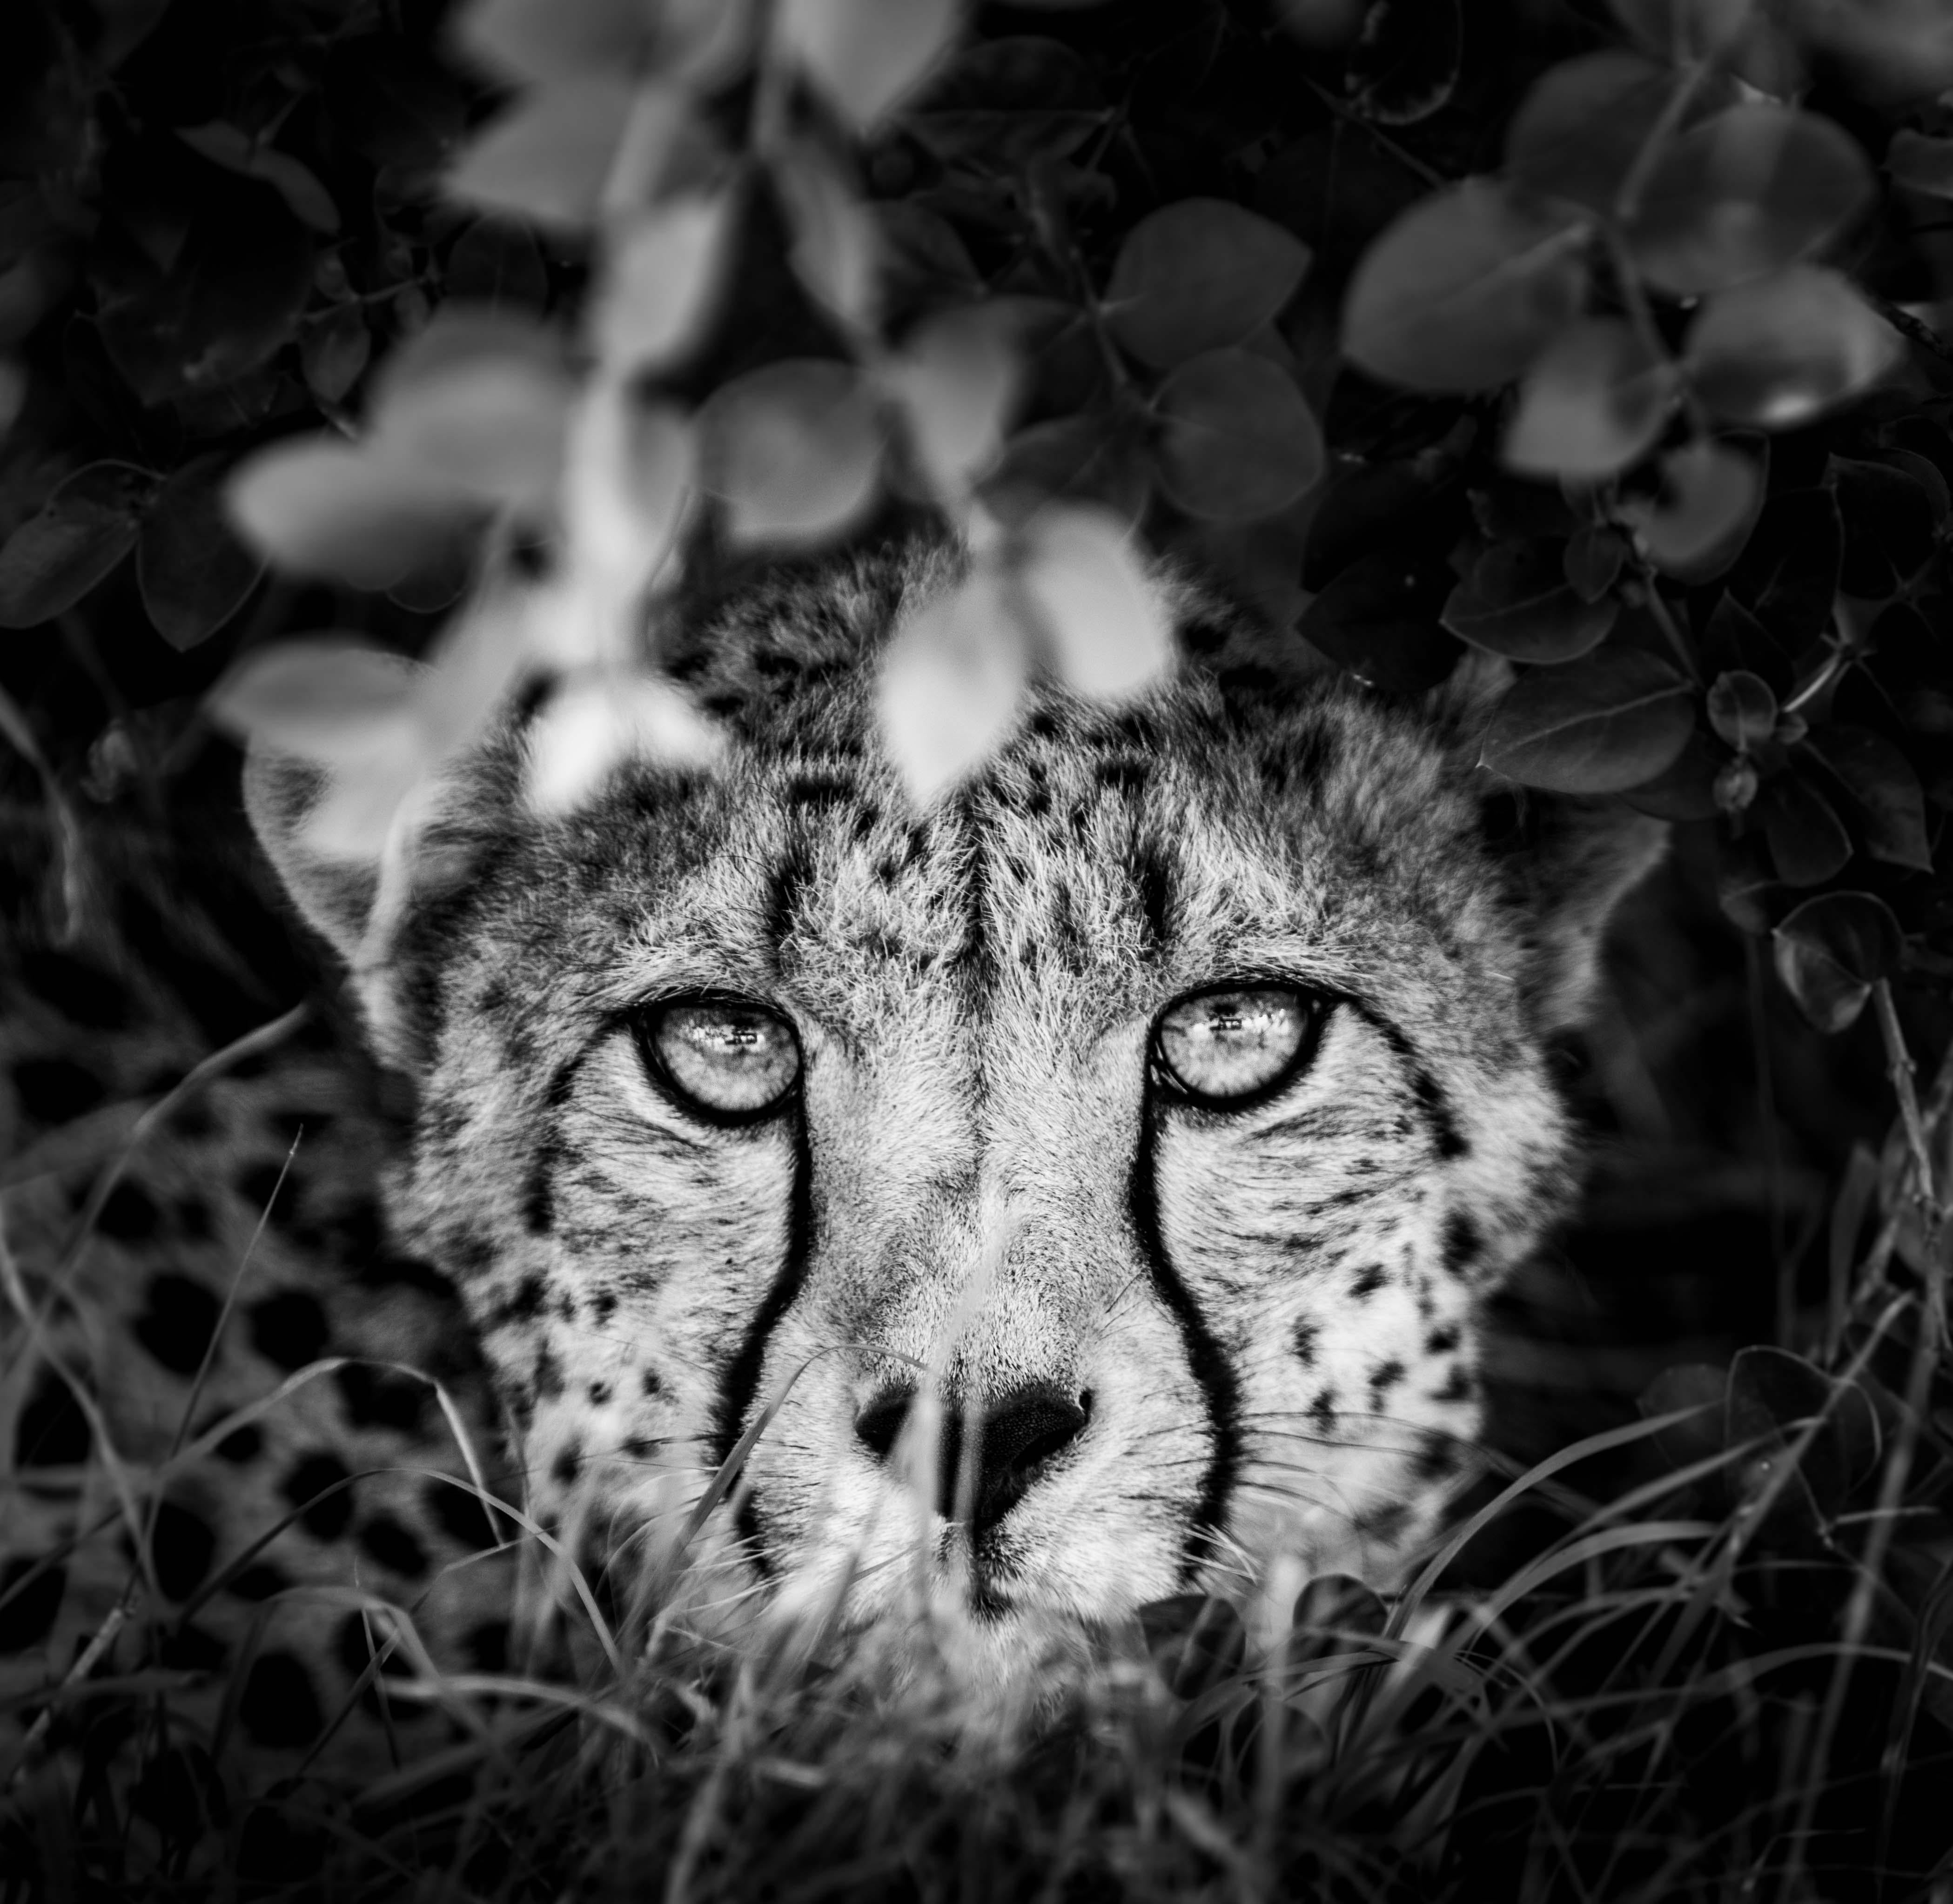 If you look closely, I have taken a self-portrait of myself in a Land Rover within the cheetah’s eyes. It is always a thrilling experience being in the company of the world’s fasted land mammal, especially when they allow you to be within just a few